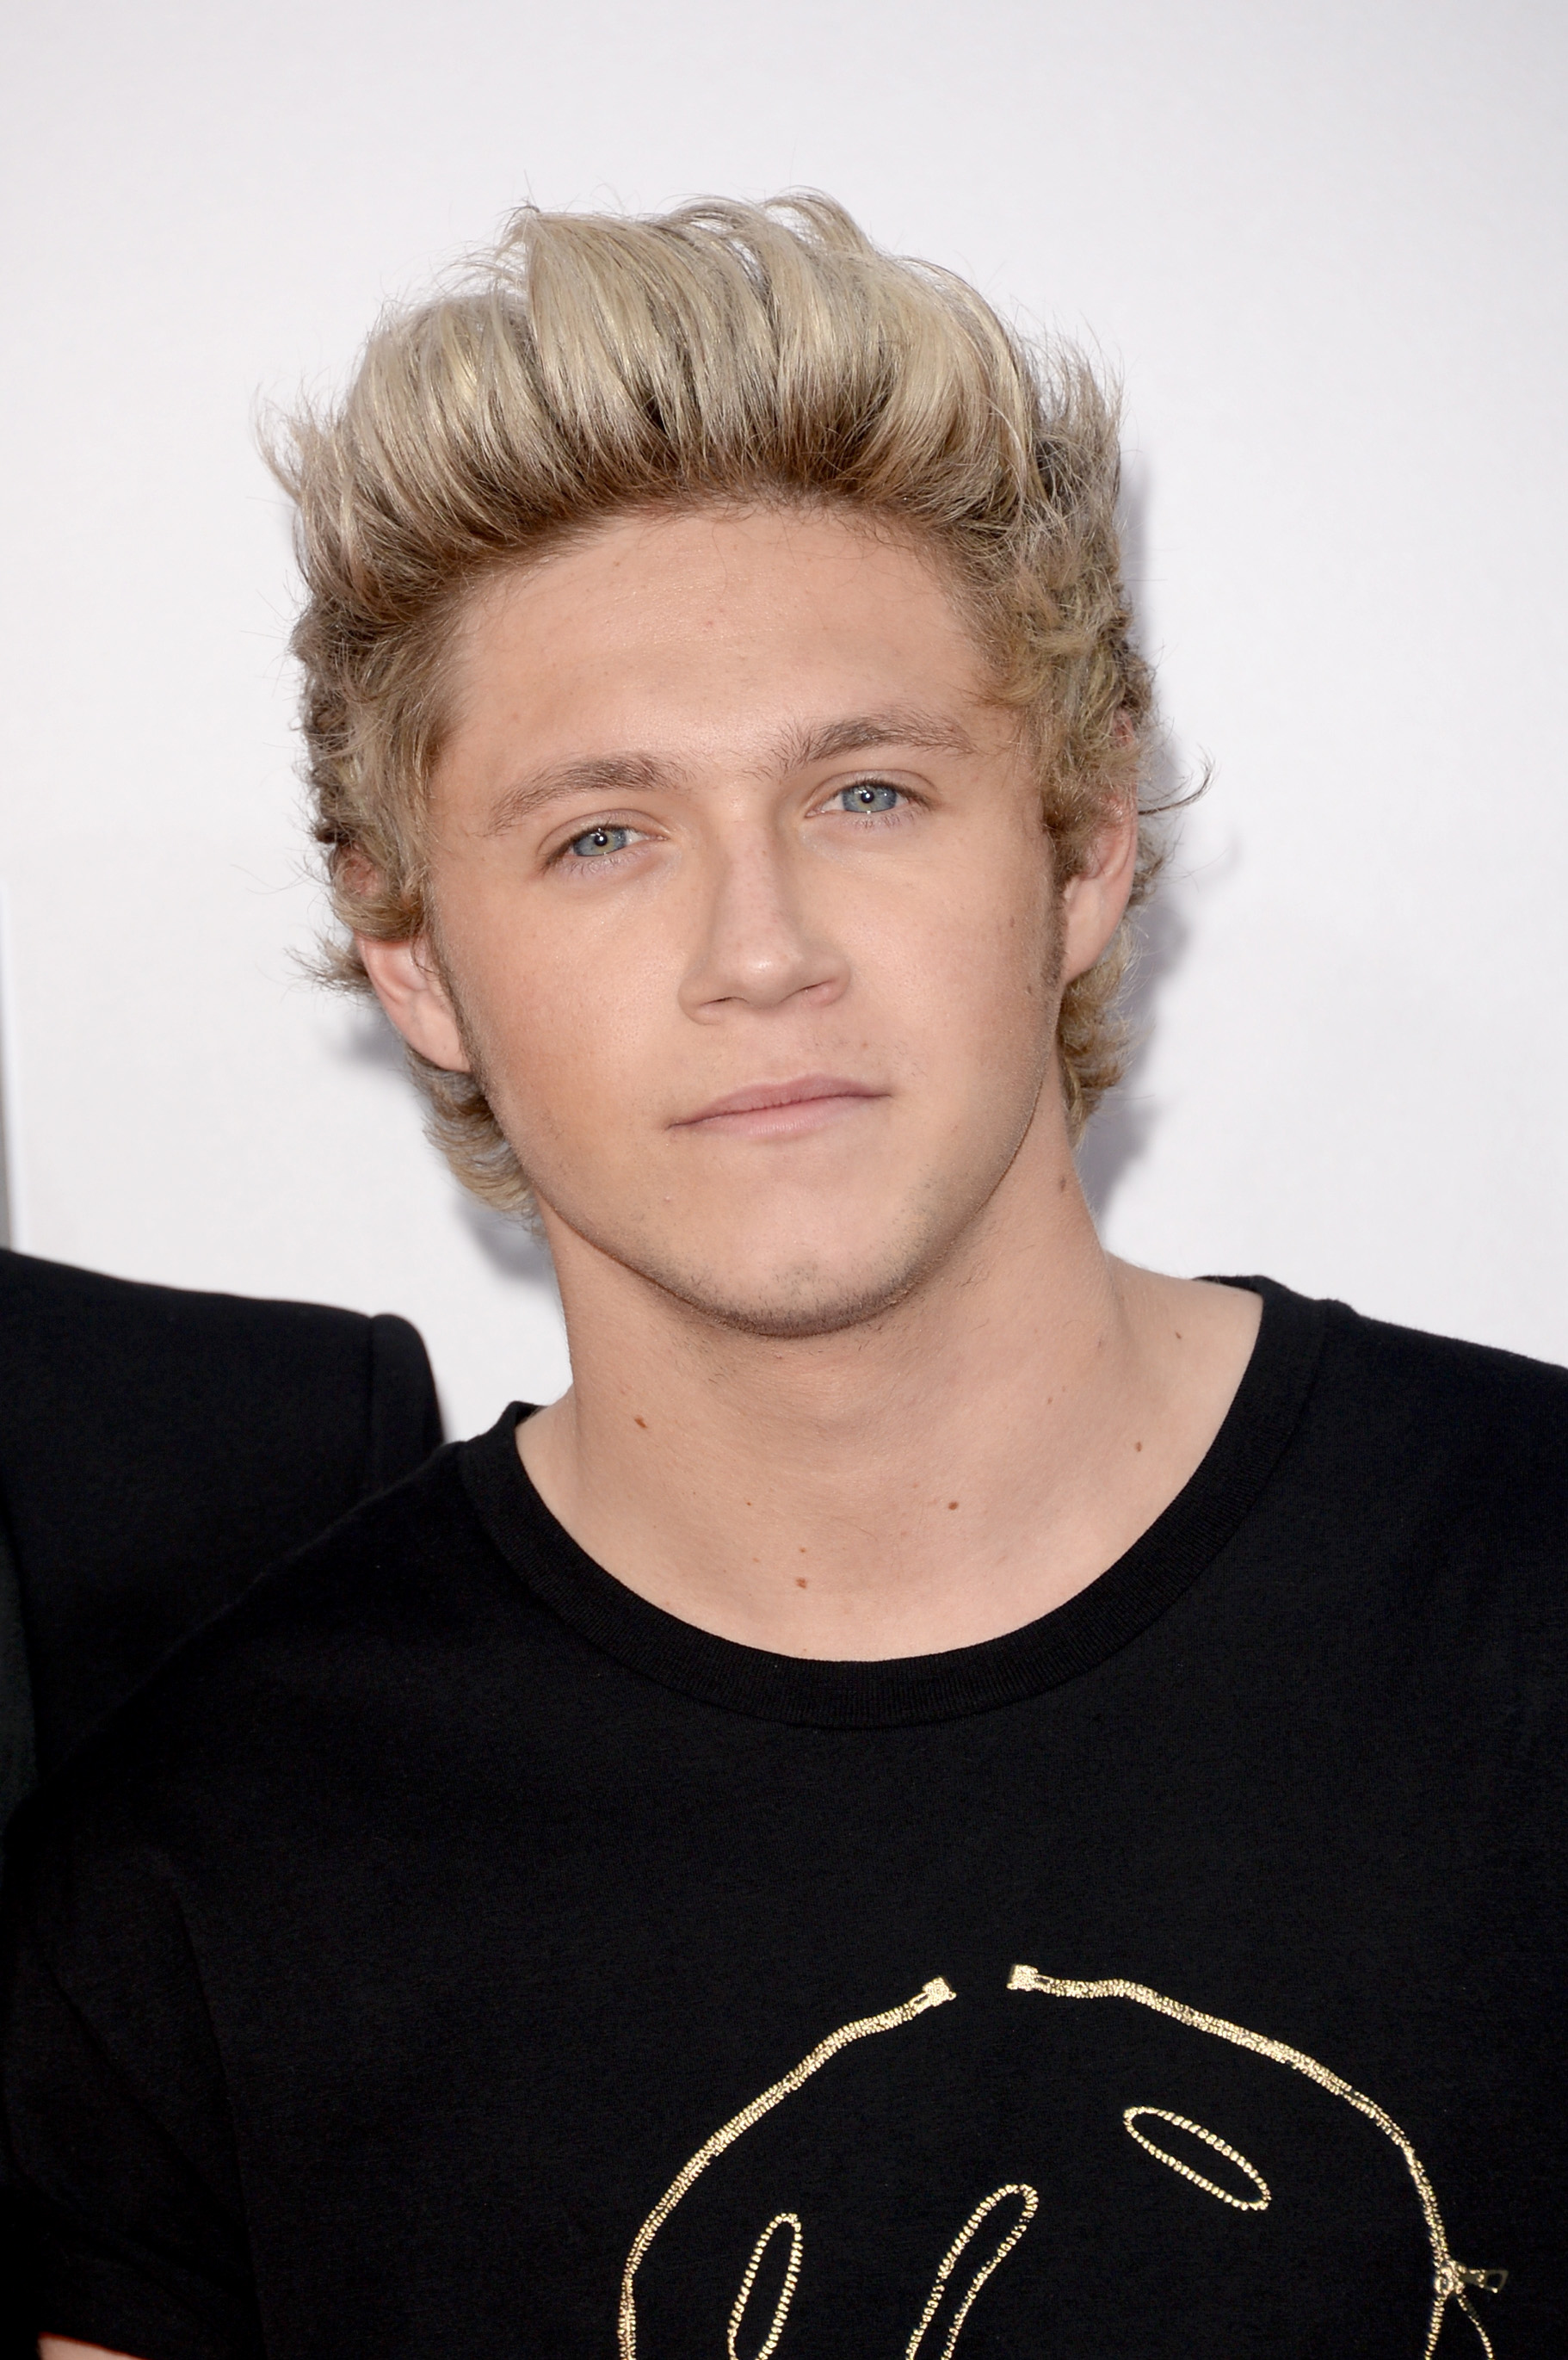 Fans divided over Niall Horan's newly-dyed brunette hair